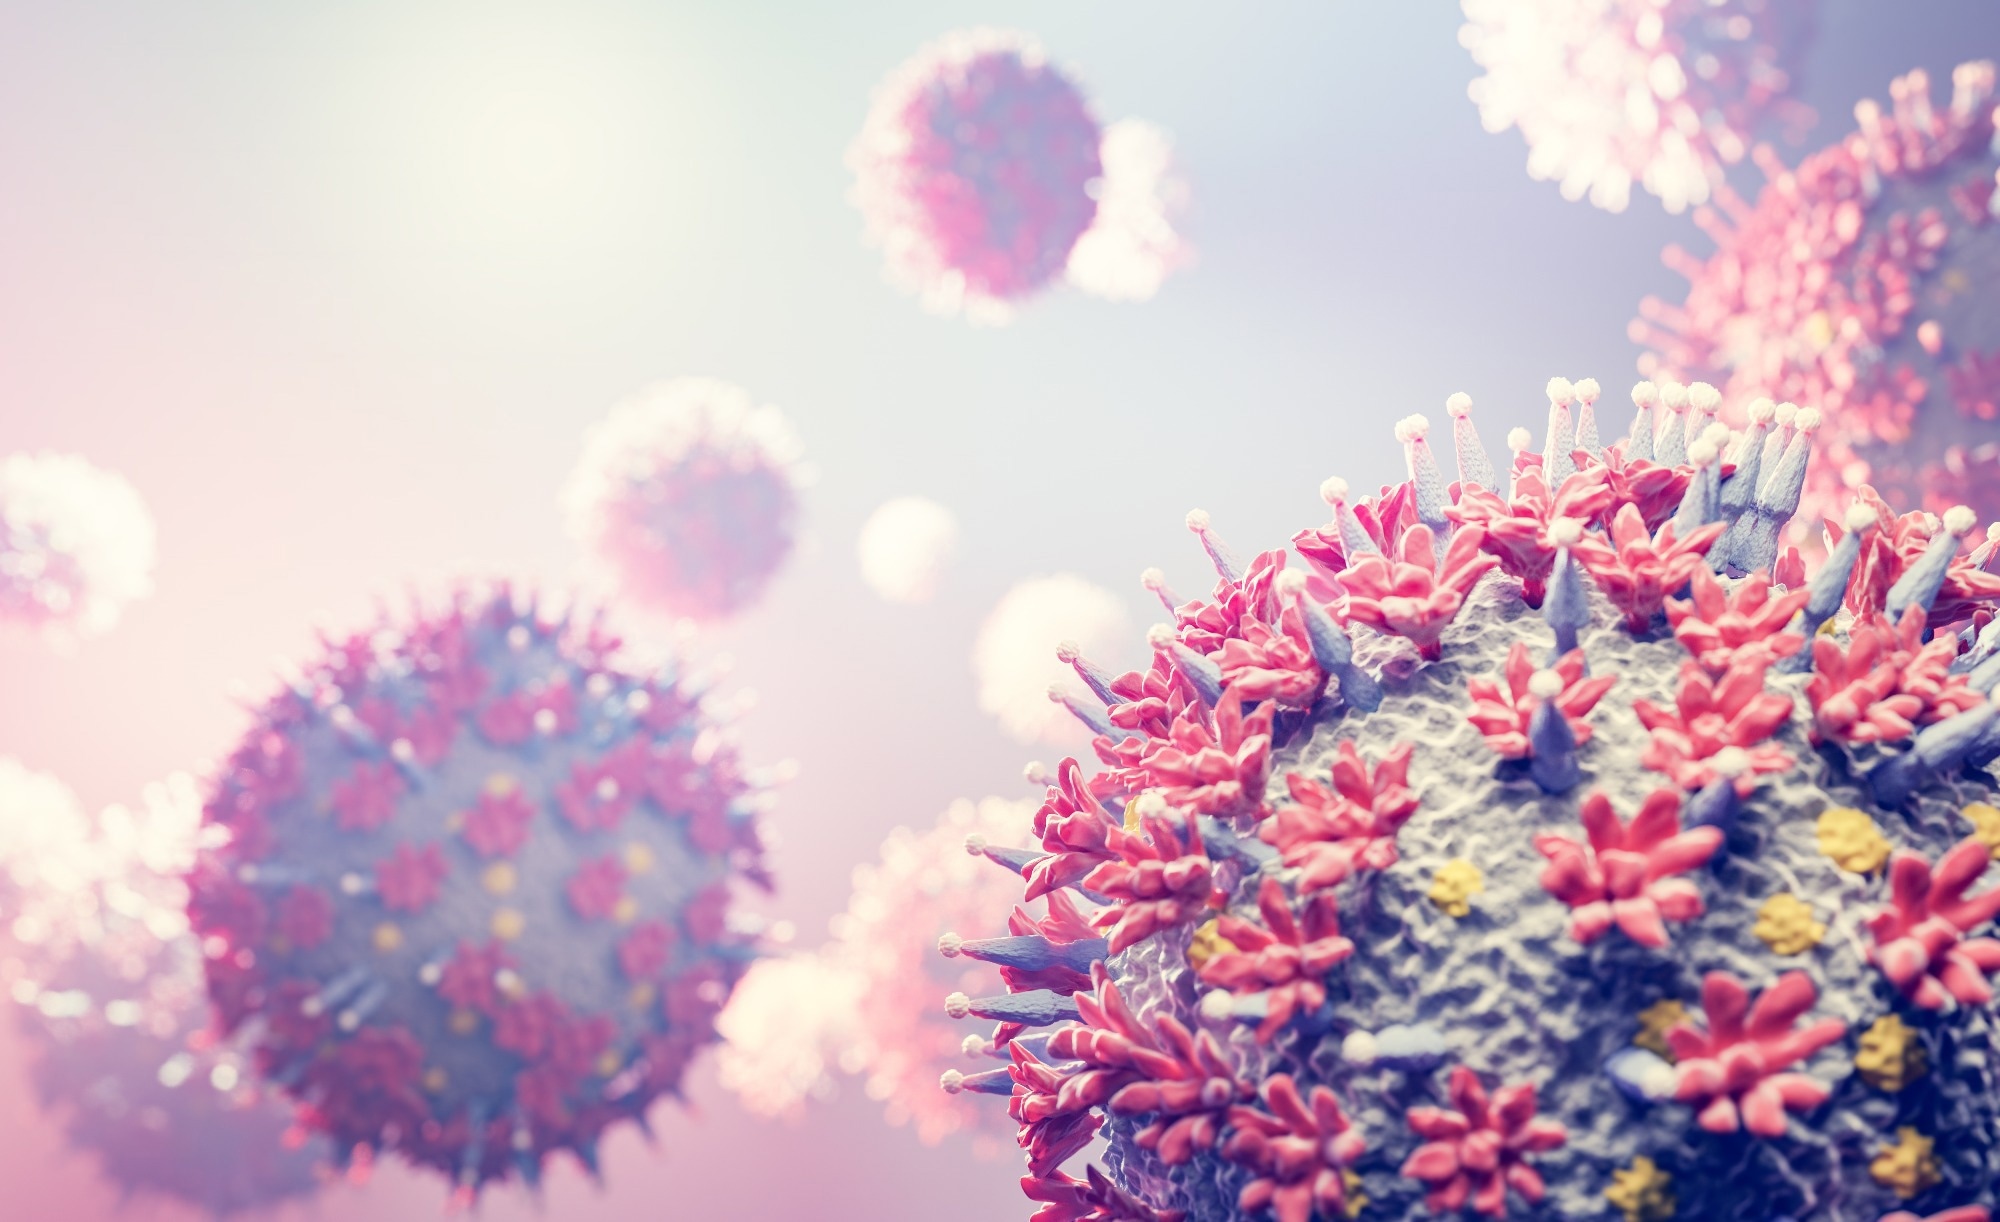 Study: SARS-CoV-2 spike conformation determines plasma neutralizing activity elicited by a wide panel of human vaccines. Image Credit: PHOTOCREO Michal Bednarek/Shutterstock